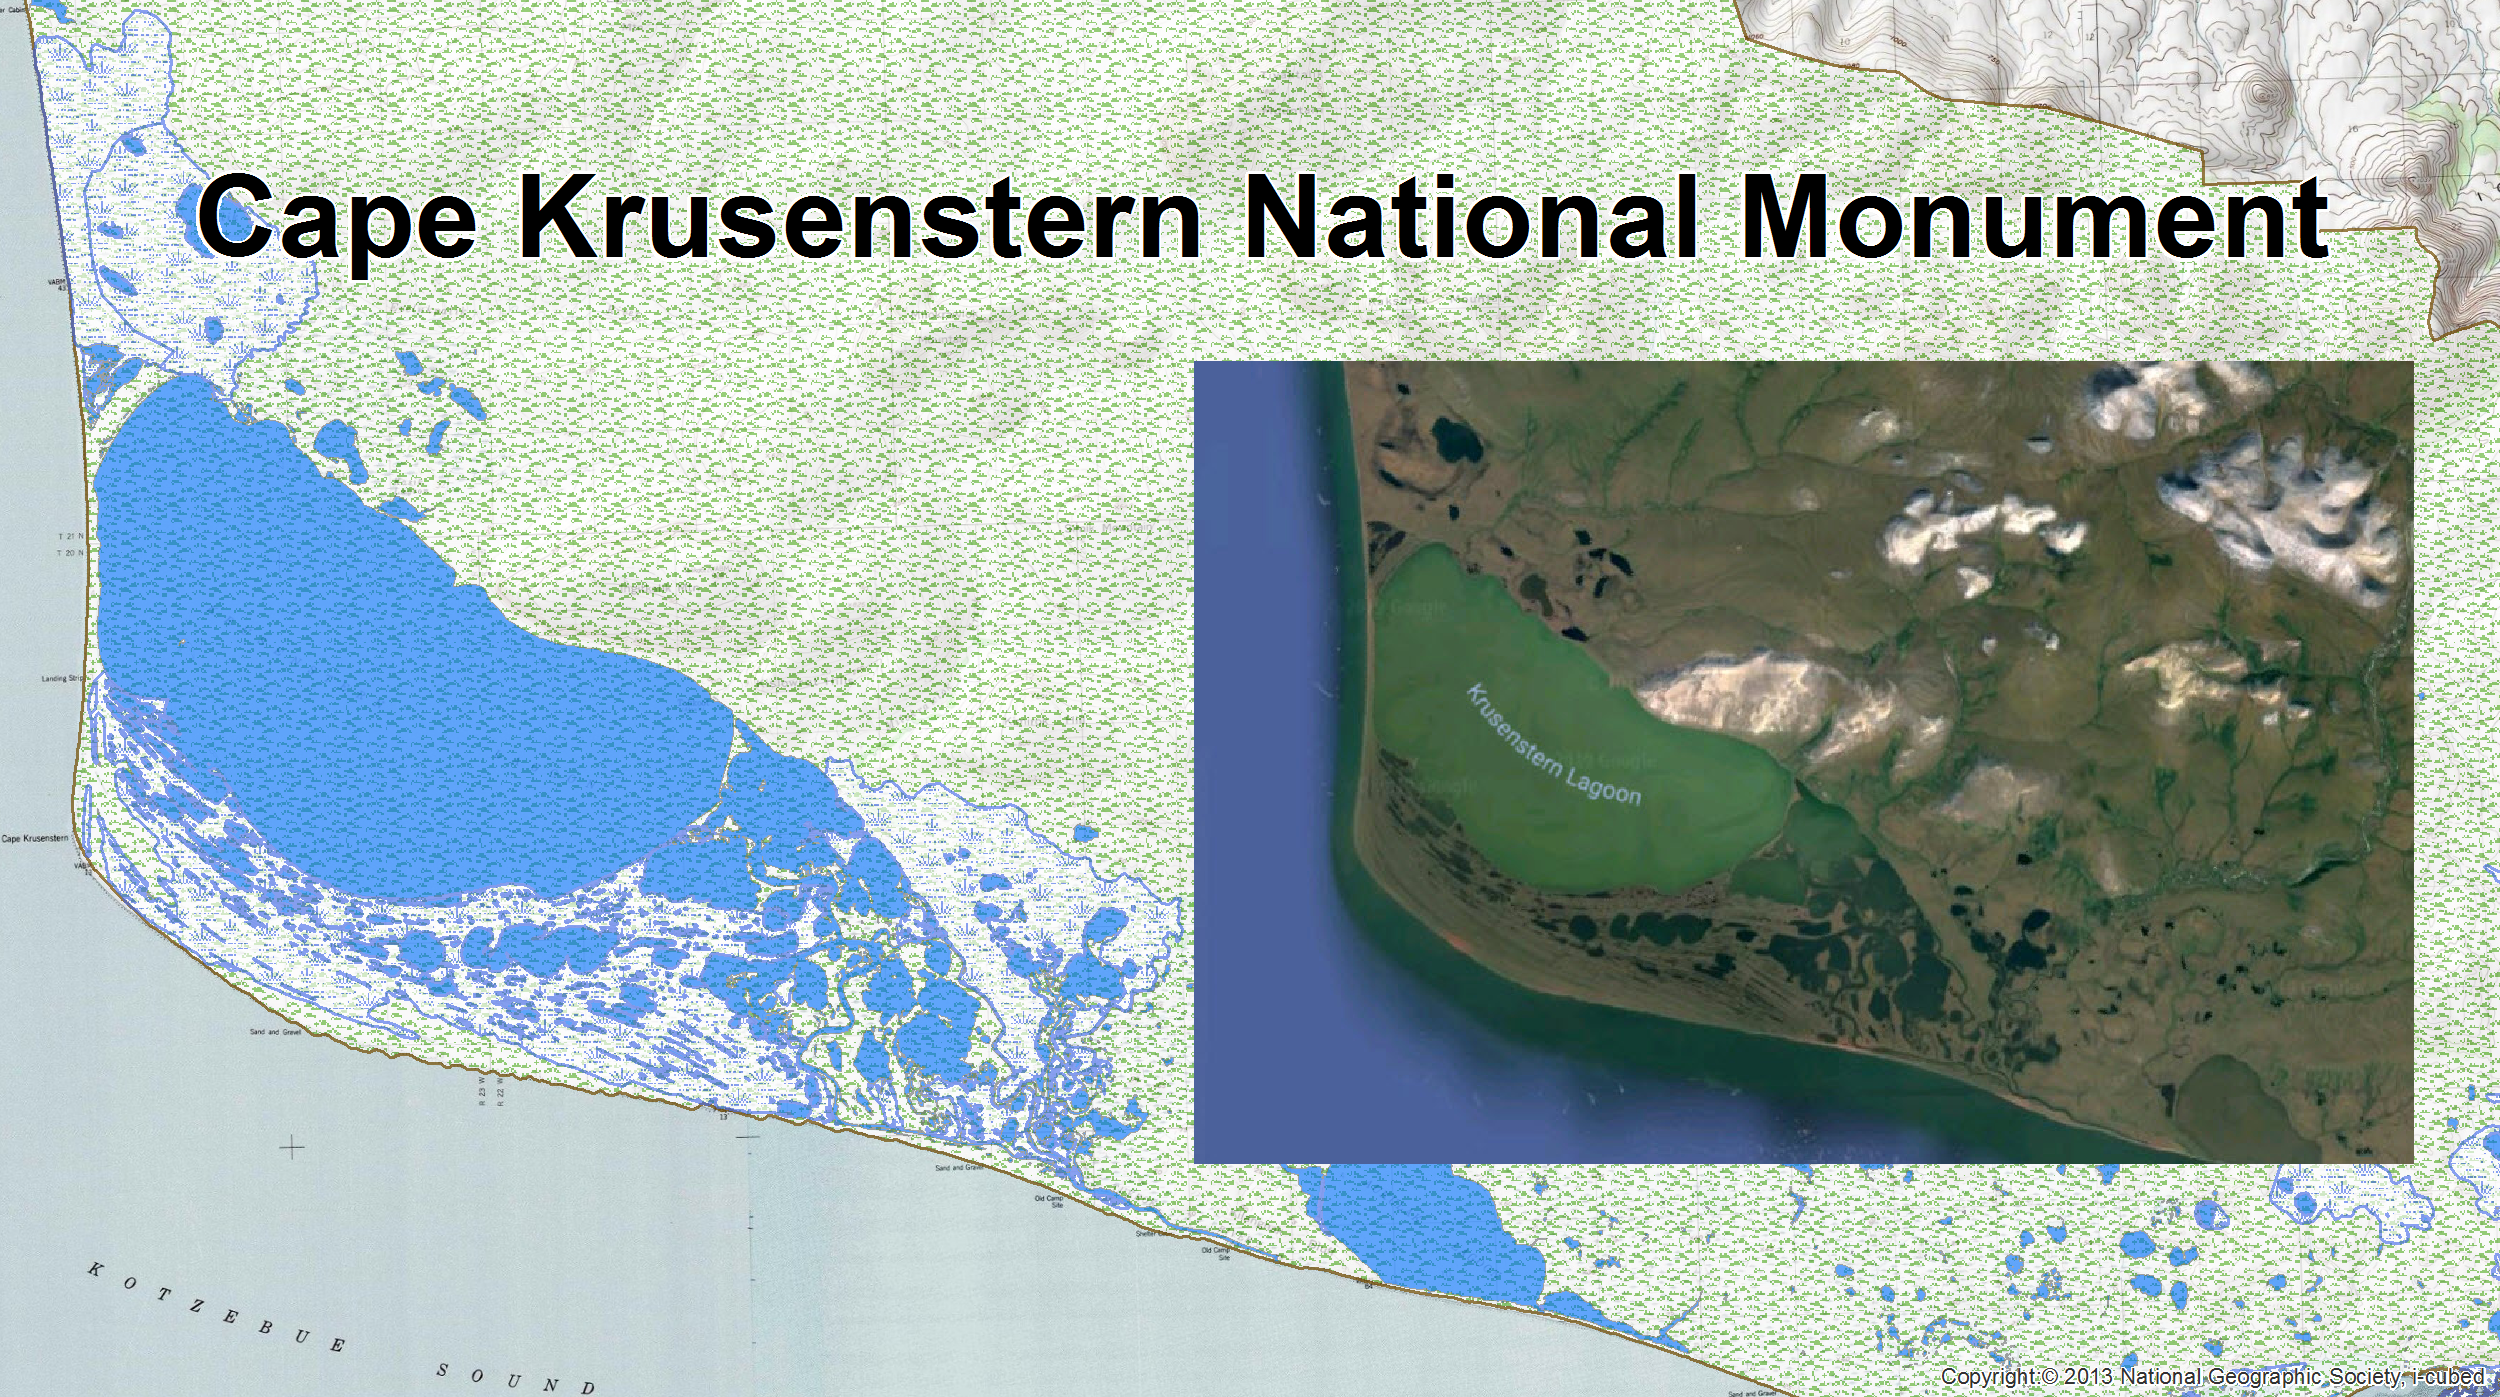 Coastal parks, such as Cape Krusenstern National Monument, may have varying numbers of lakes depending on the tide level.